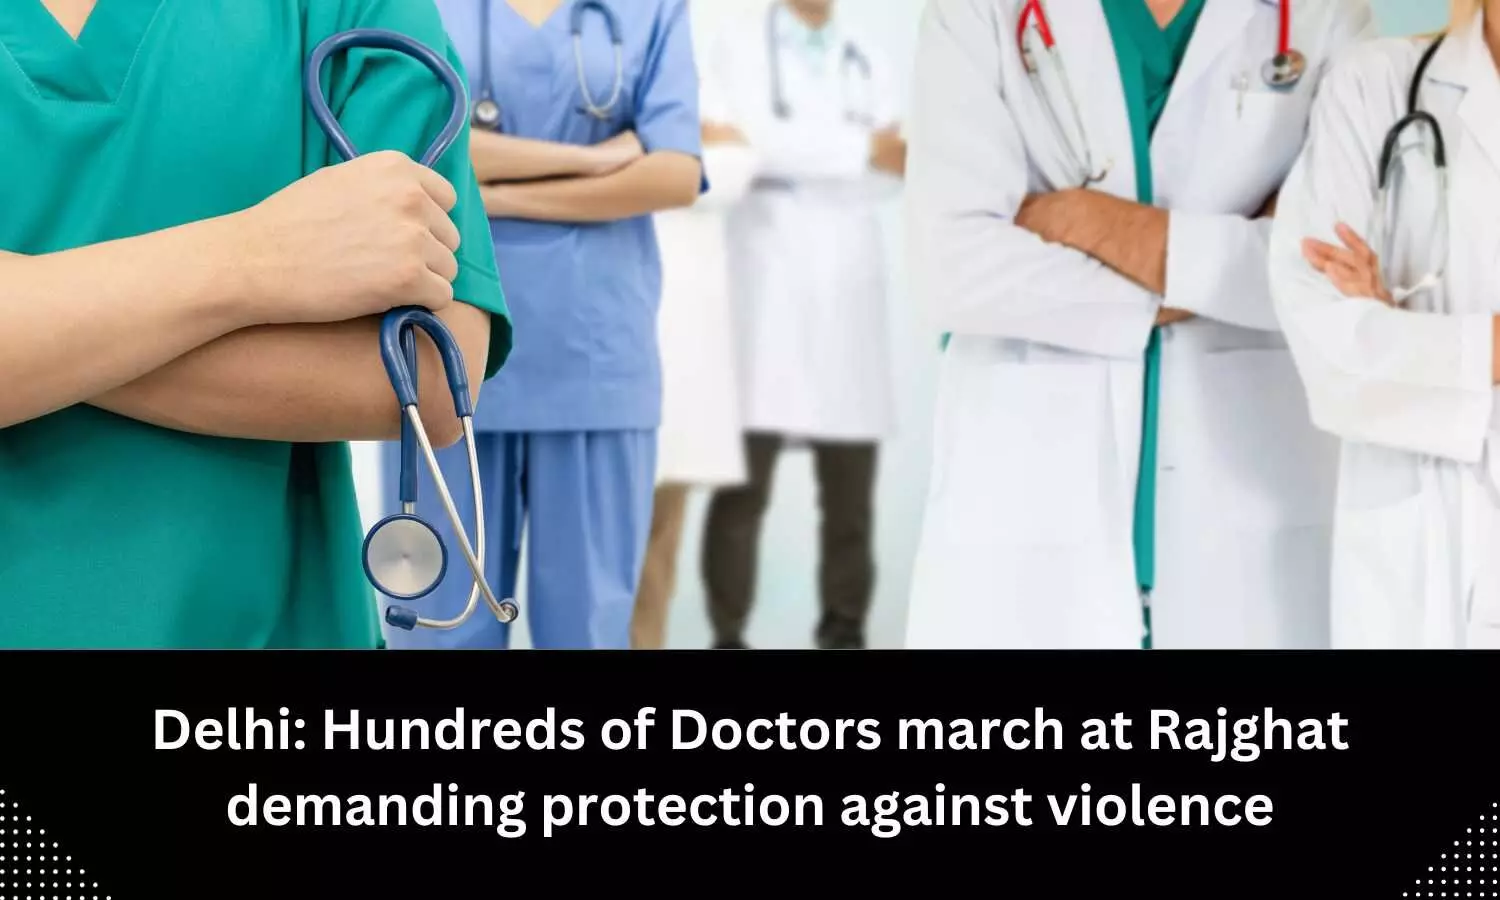 Doctors march at Rajghat demanding protection against violence